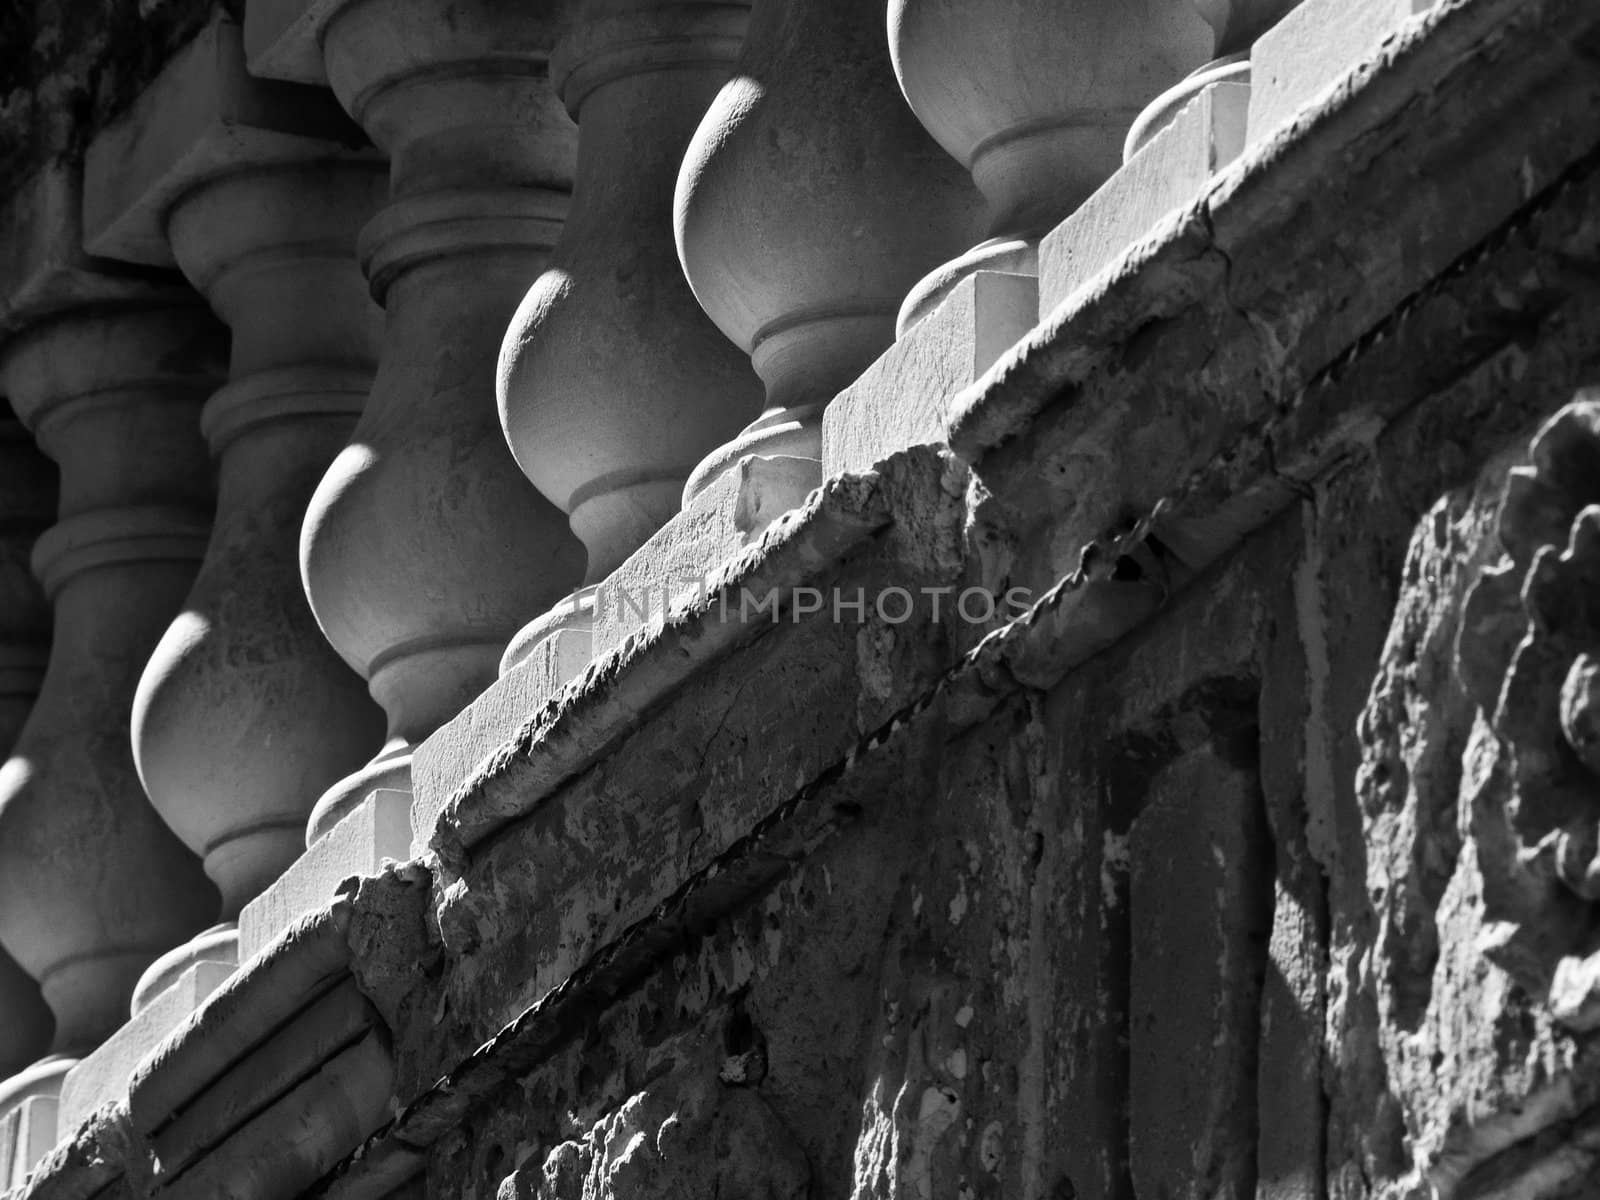 Detail in monochrome of stone balustrades on a balcony in Malta